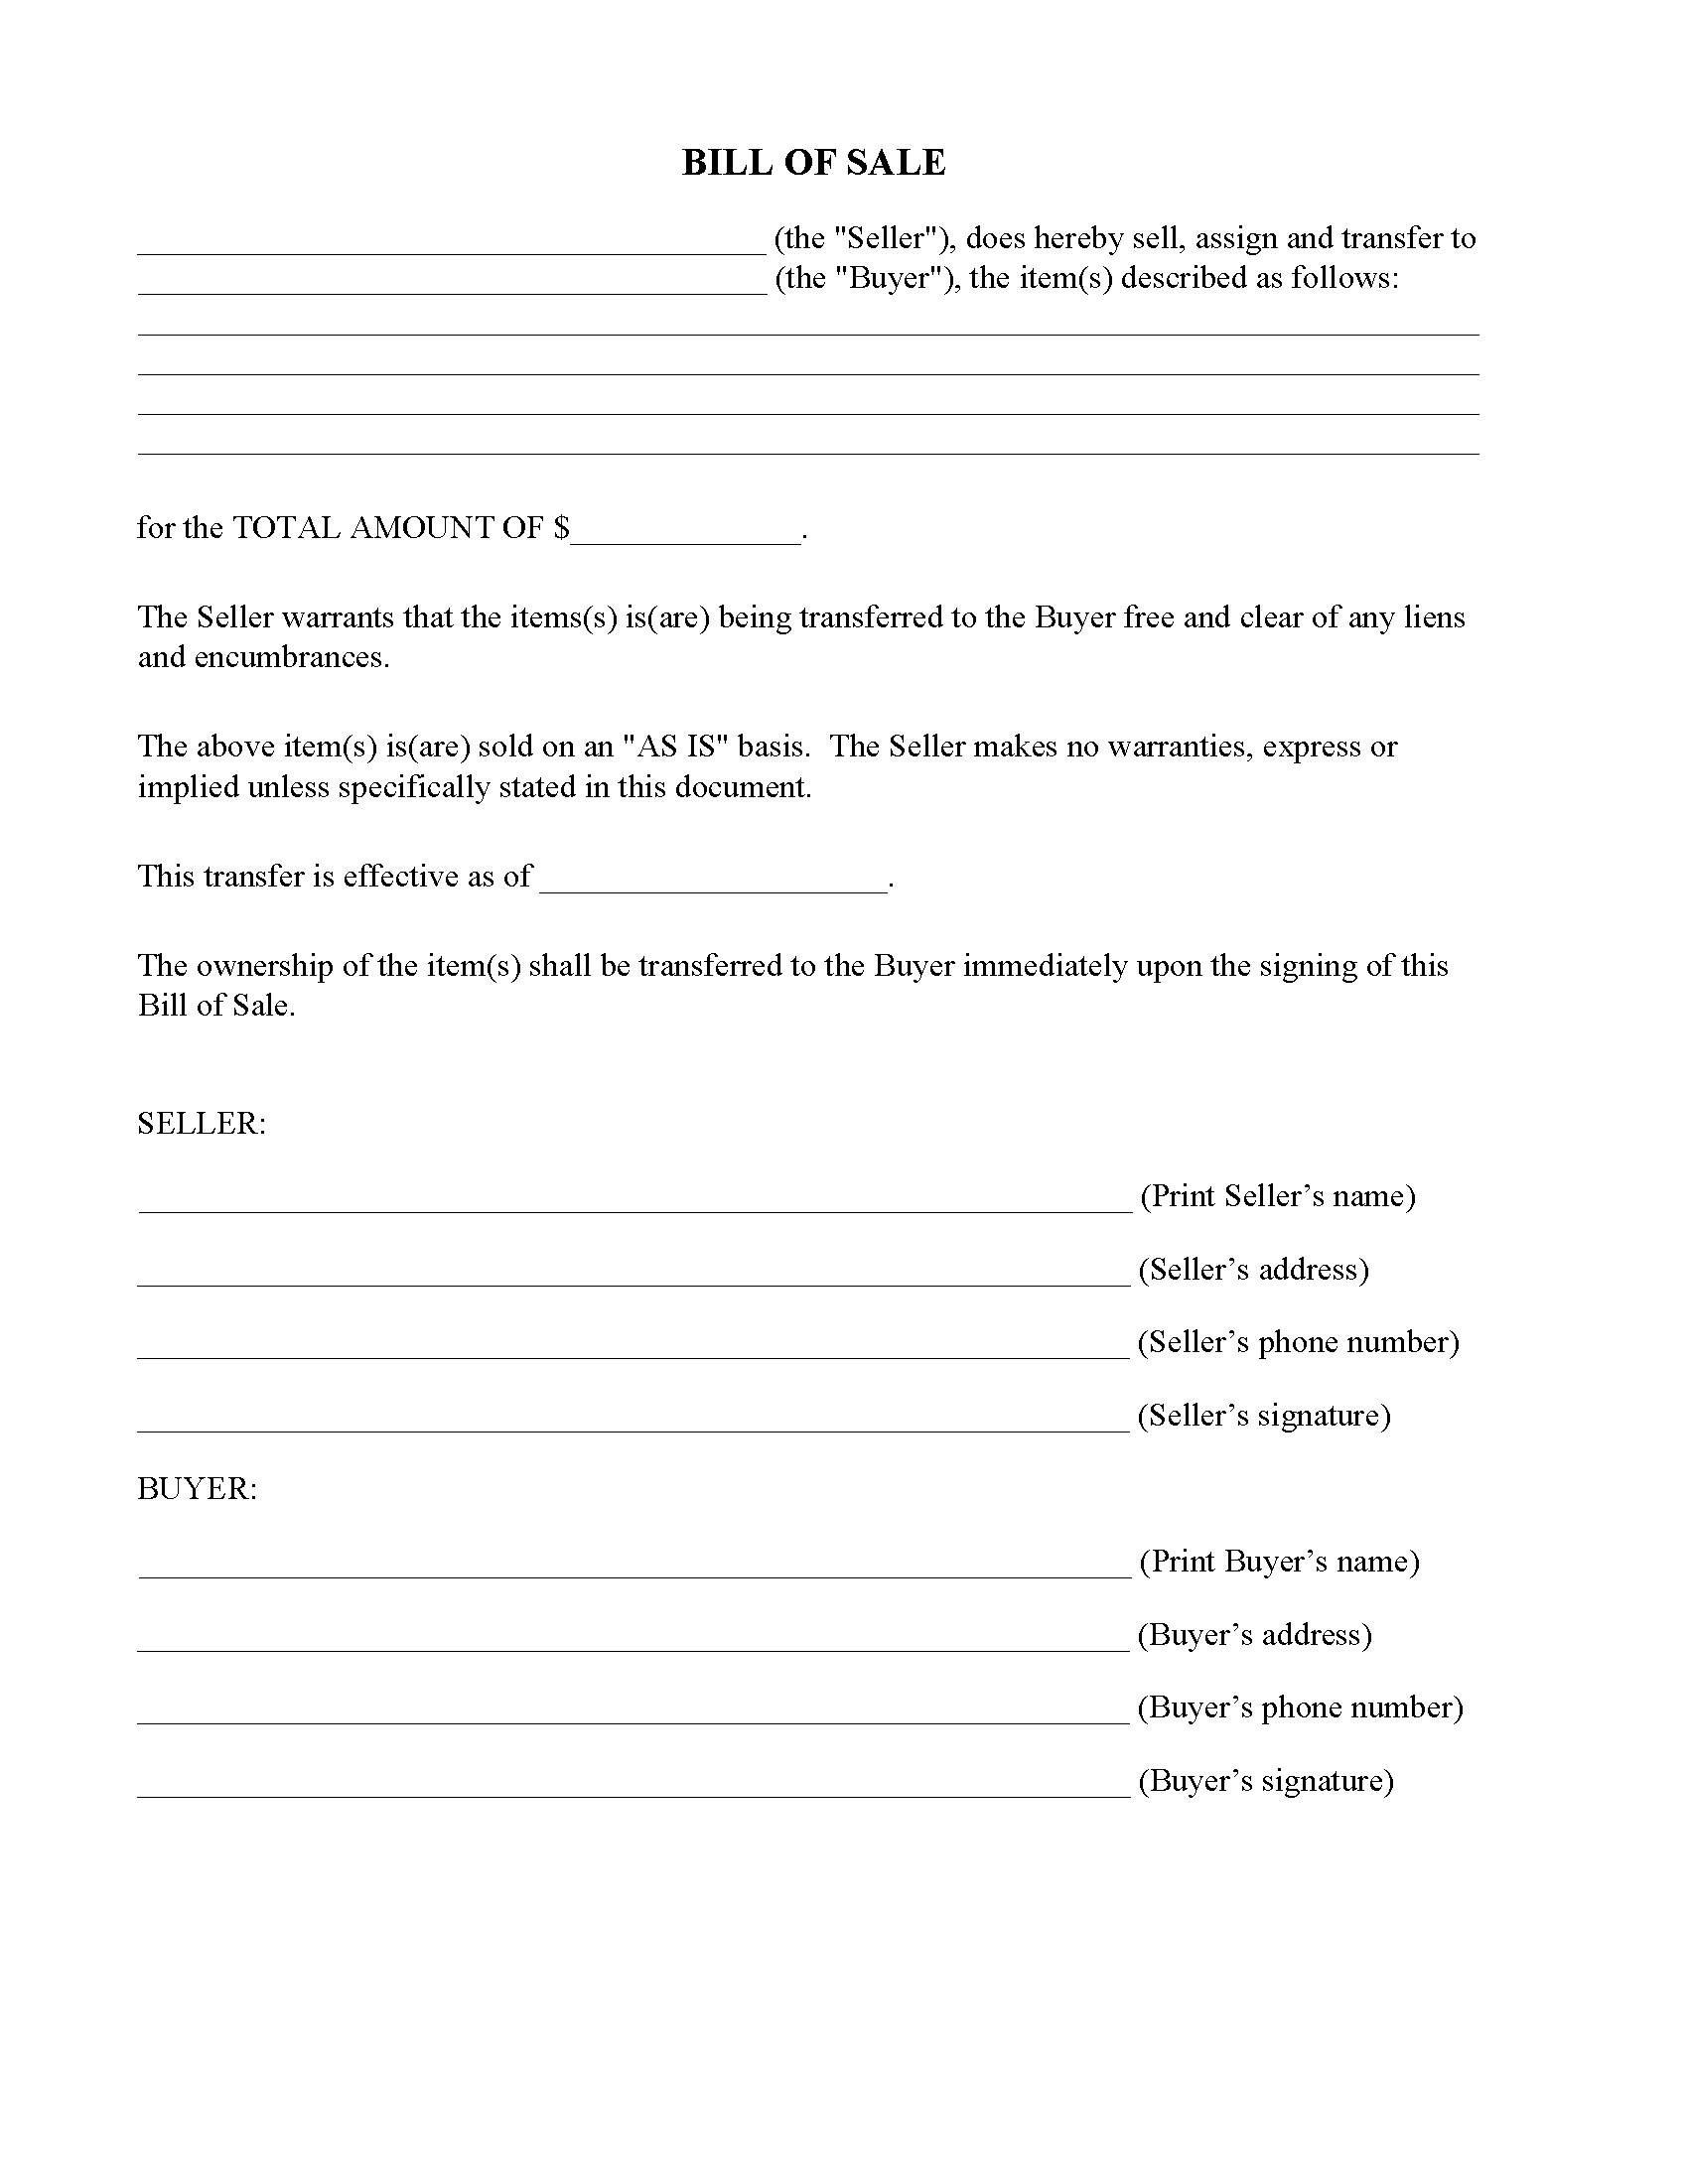 Ohio Simple Bill of Sale Form Free Printable Legal Forms